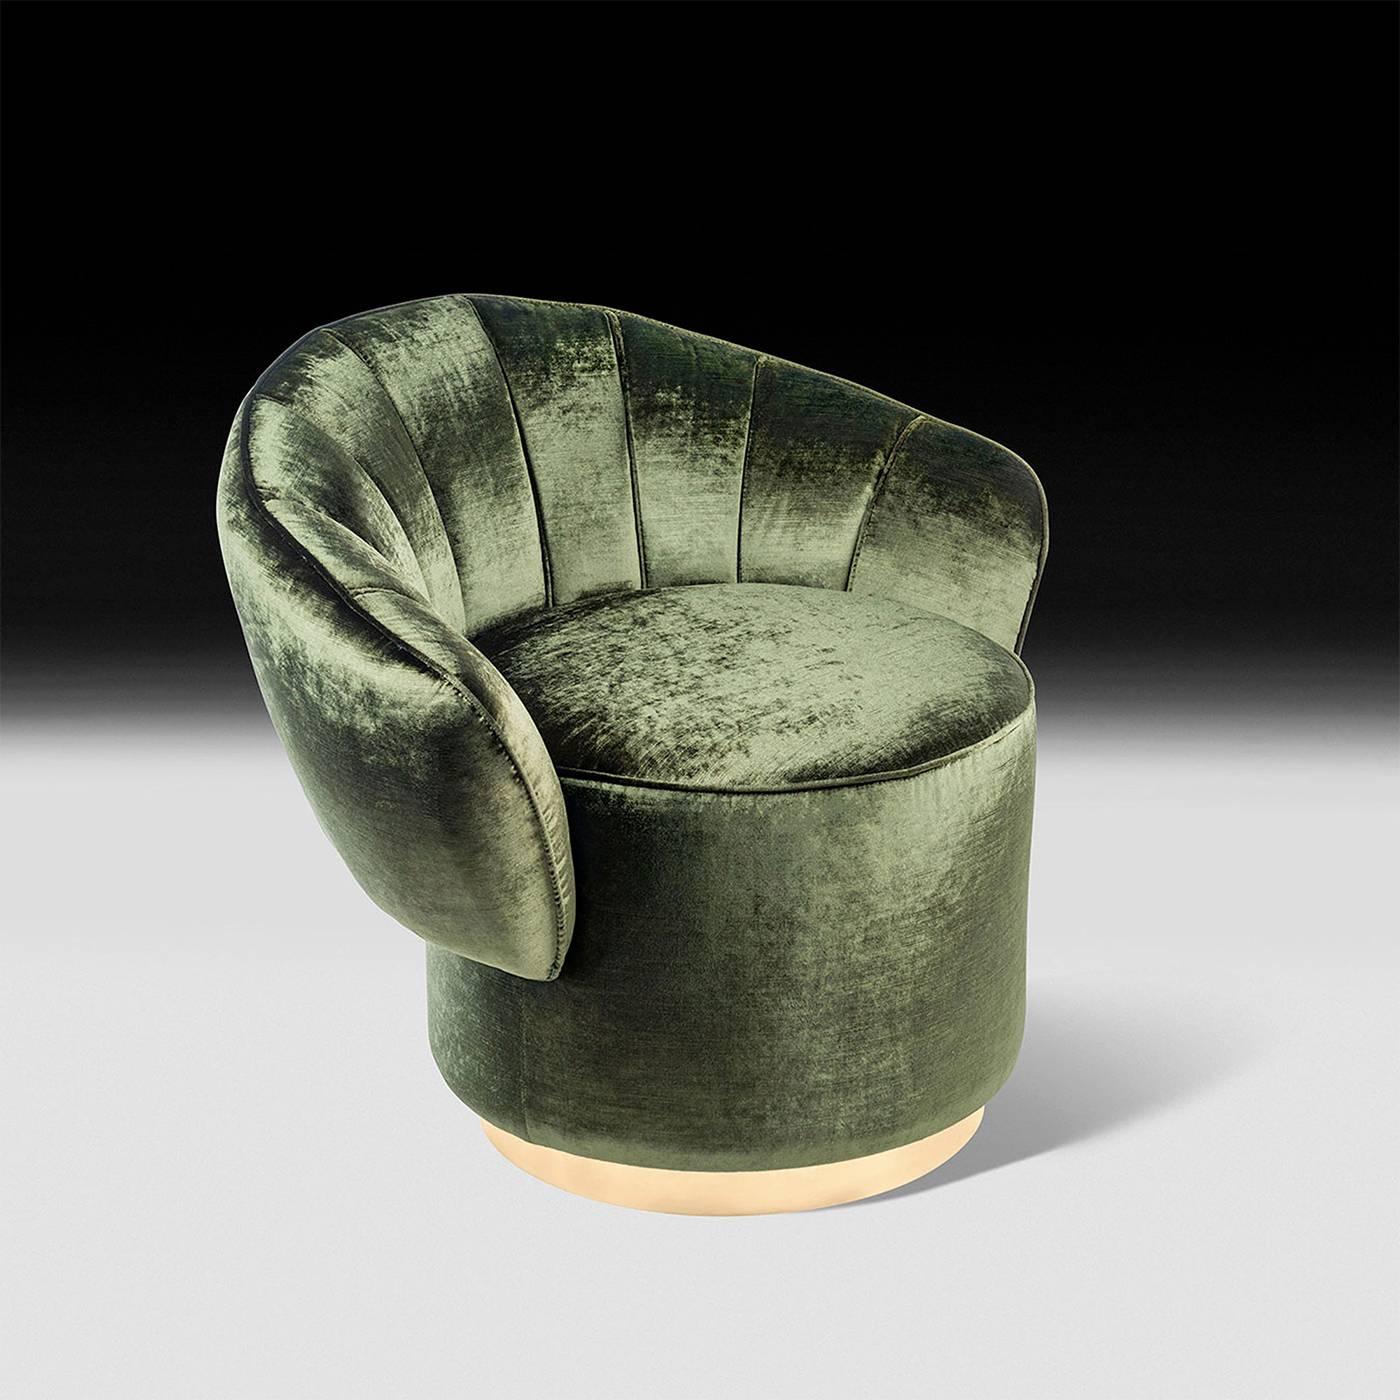 This superb armchair will make a statement in any decor, thanks to its unique shell-like backrest, supported by a simple cylindrical tall seat cushion. This exquisite piece was designed by Giorgio Ragazzini for VG and is inspired by Art Deco style